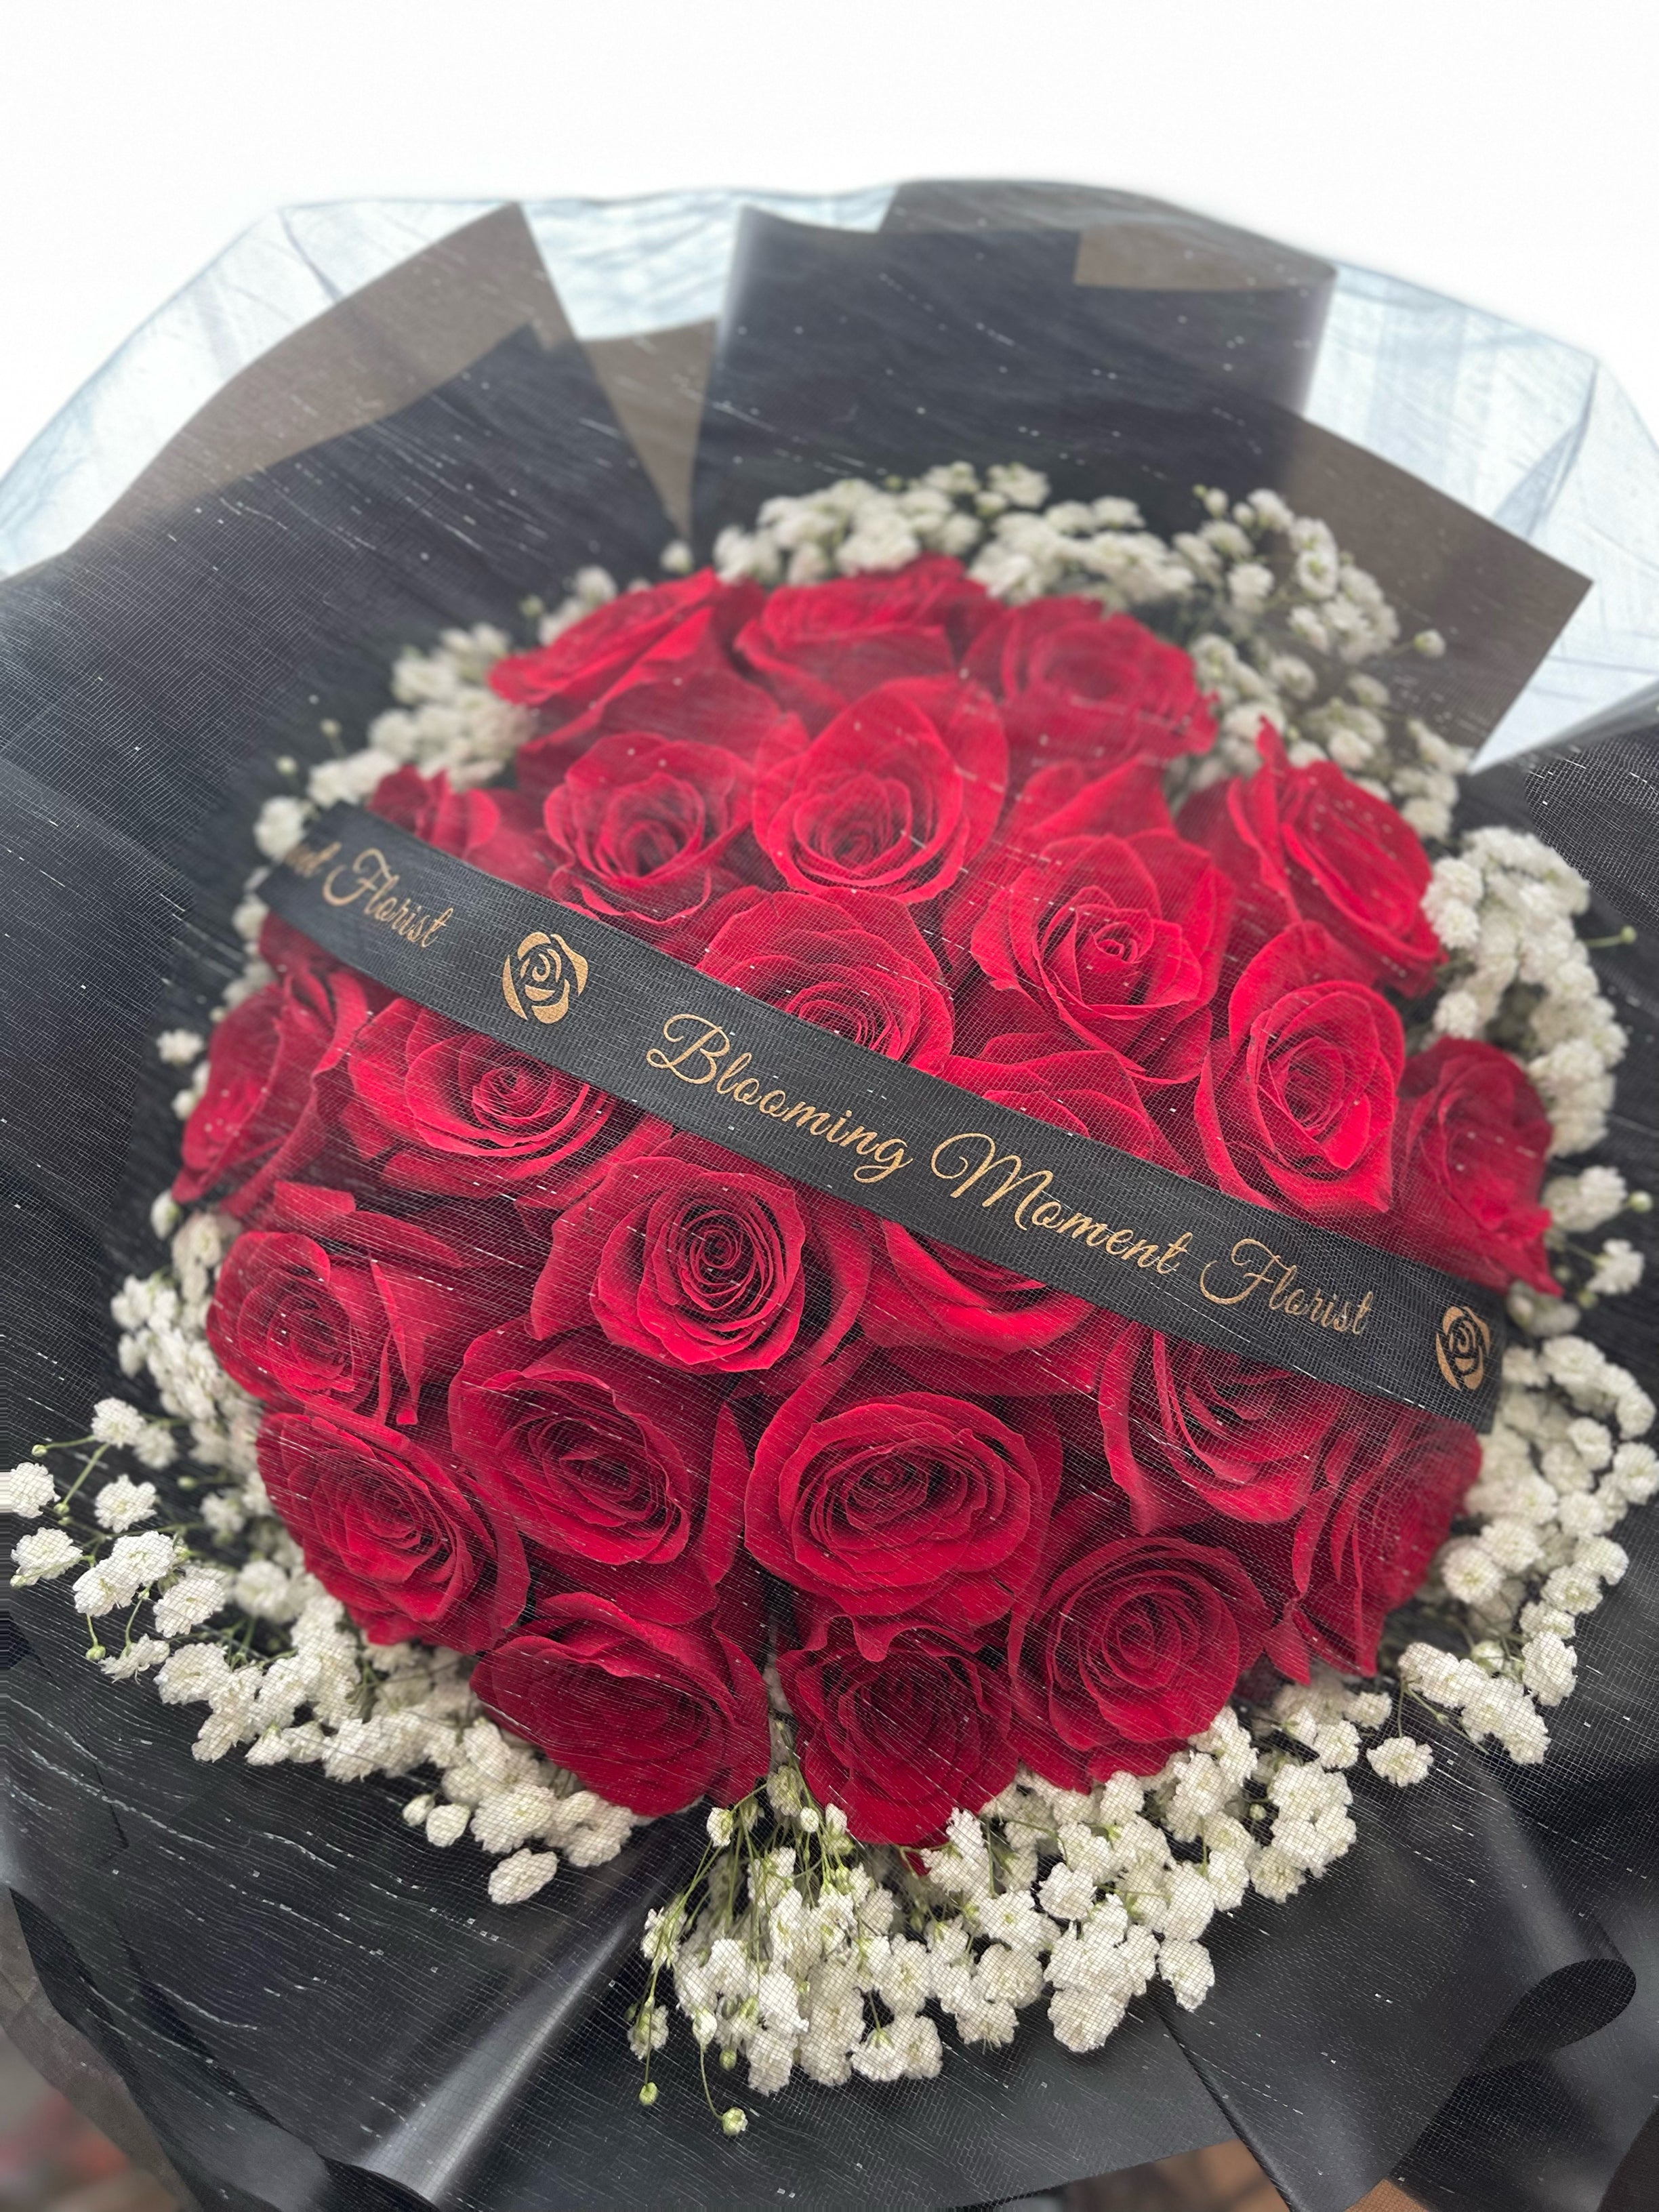 FRESH FLOWER] Classic romance red rose bouquet – Blooming Moment